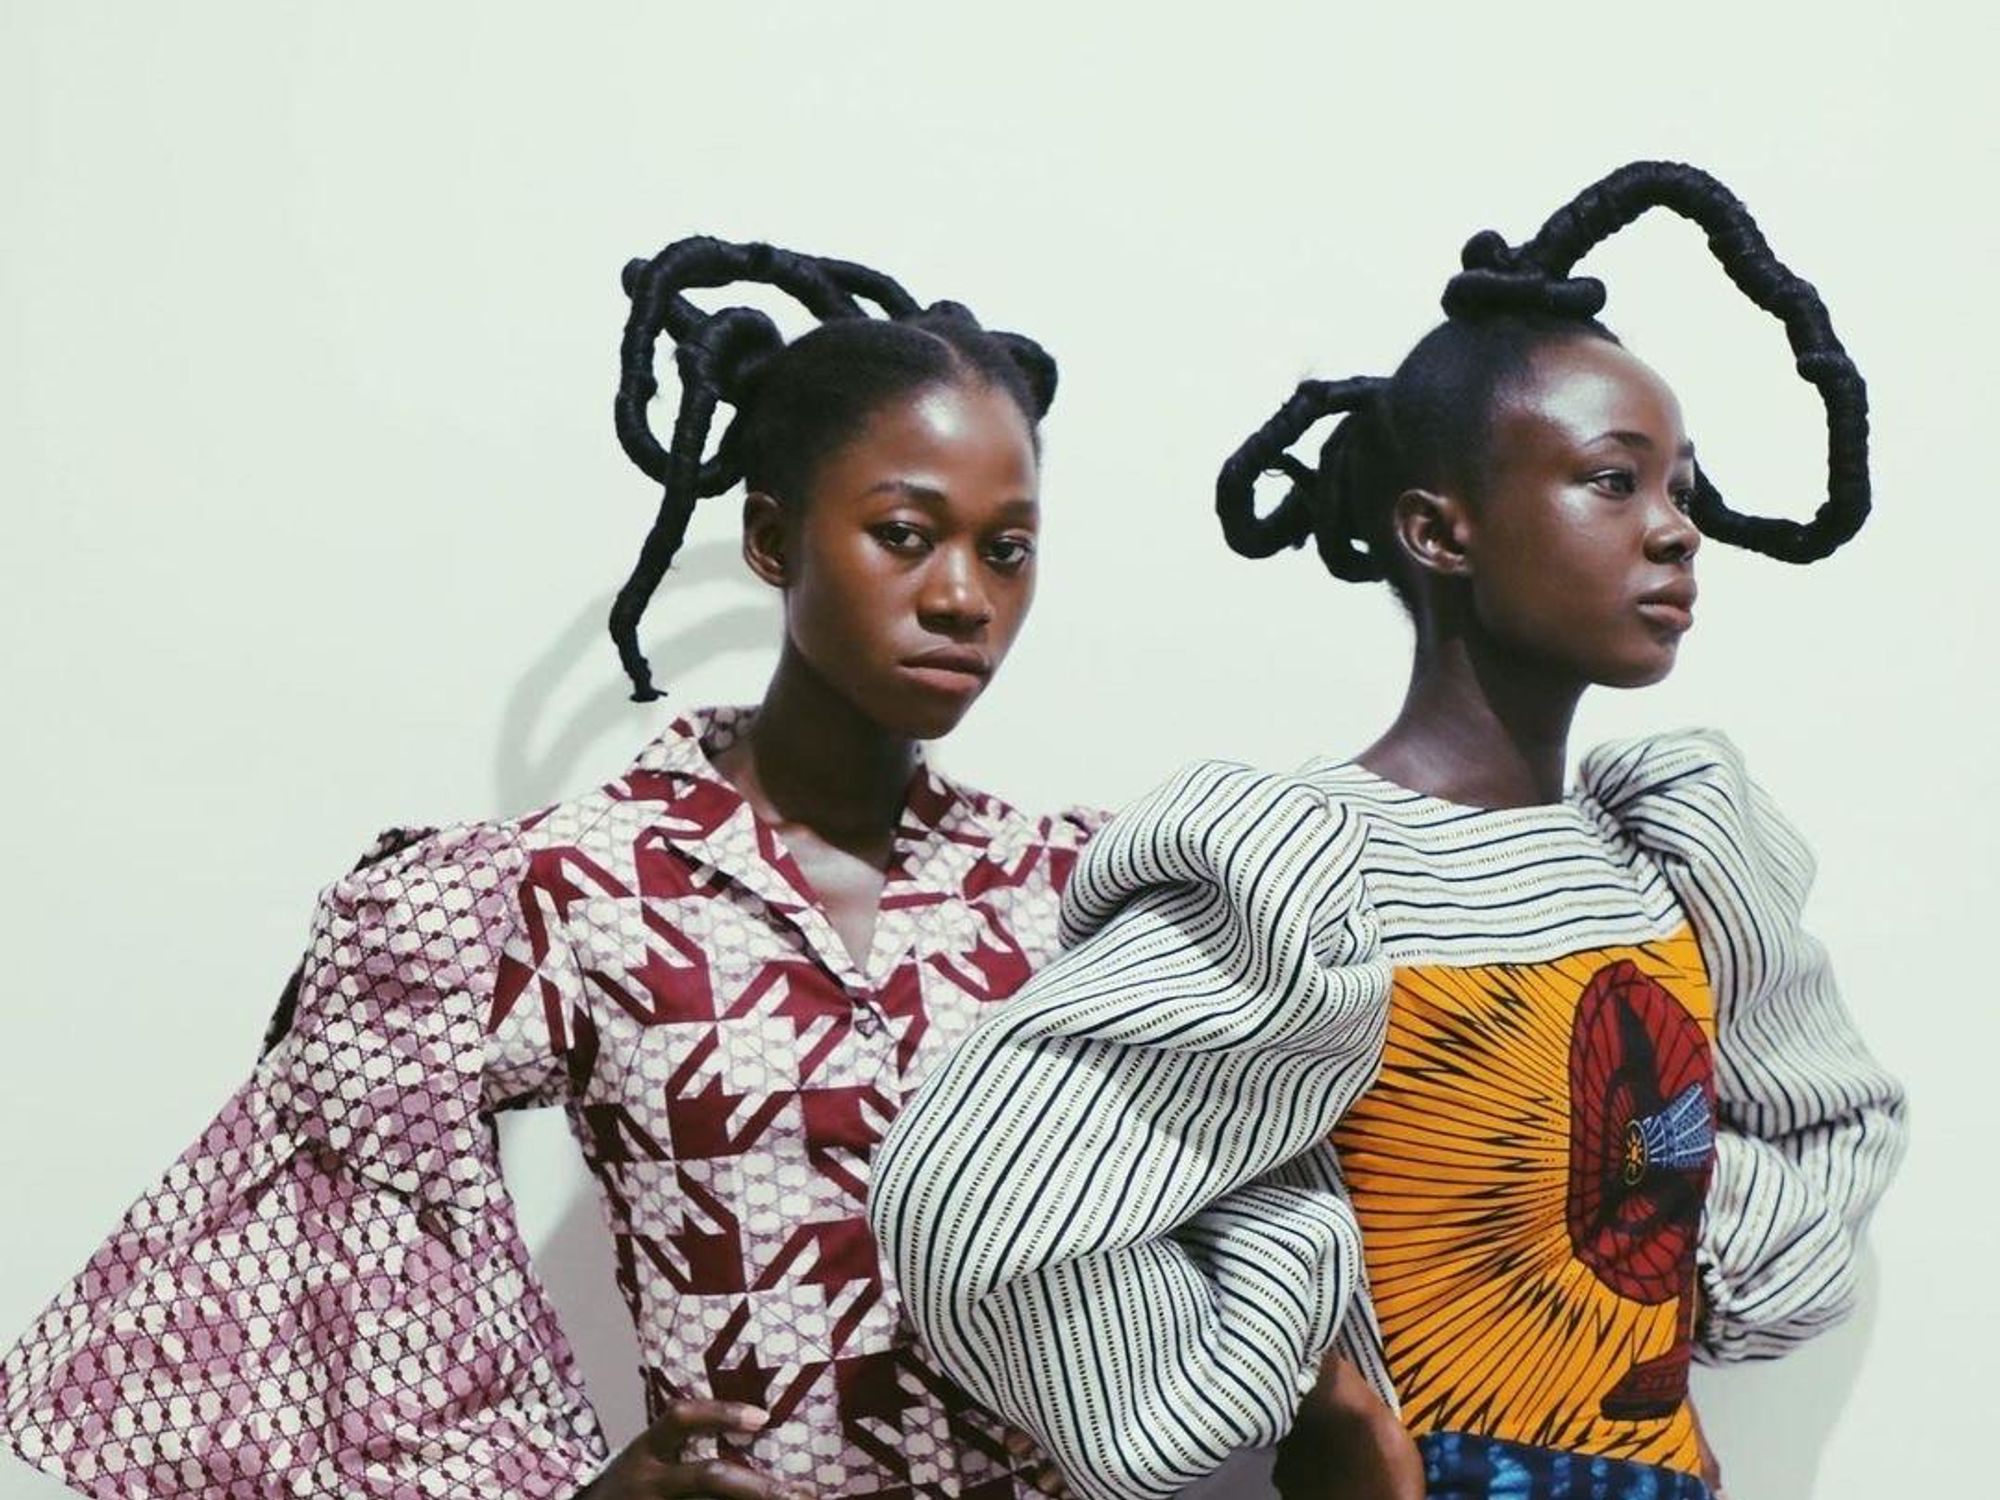 Ghanaian Designer Steve French On The Influence of Cartoons & Earning A Gucci Fellowship